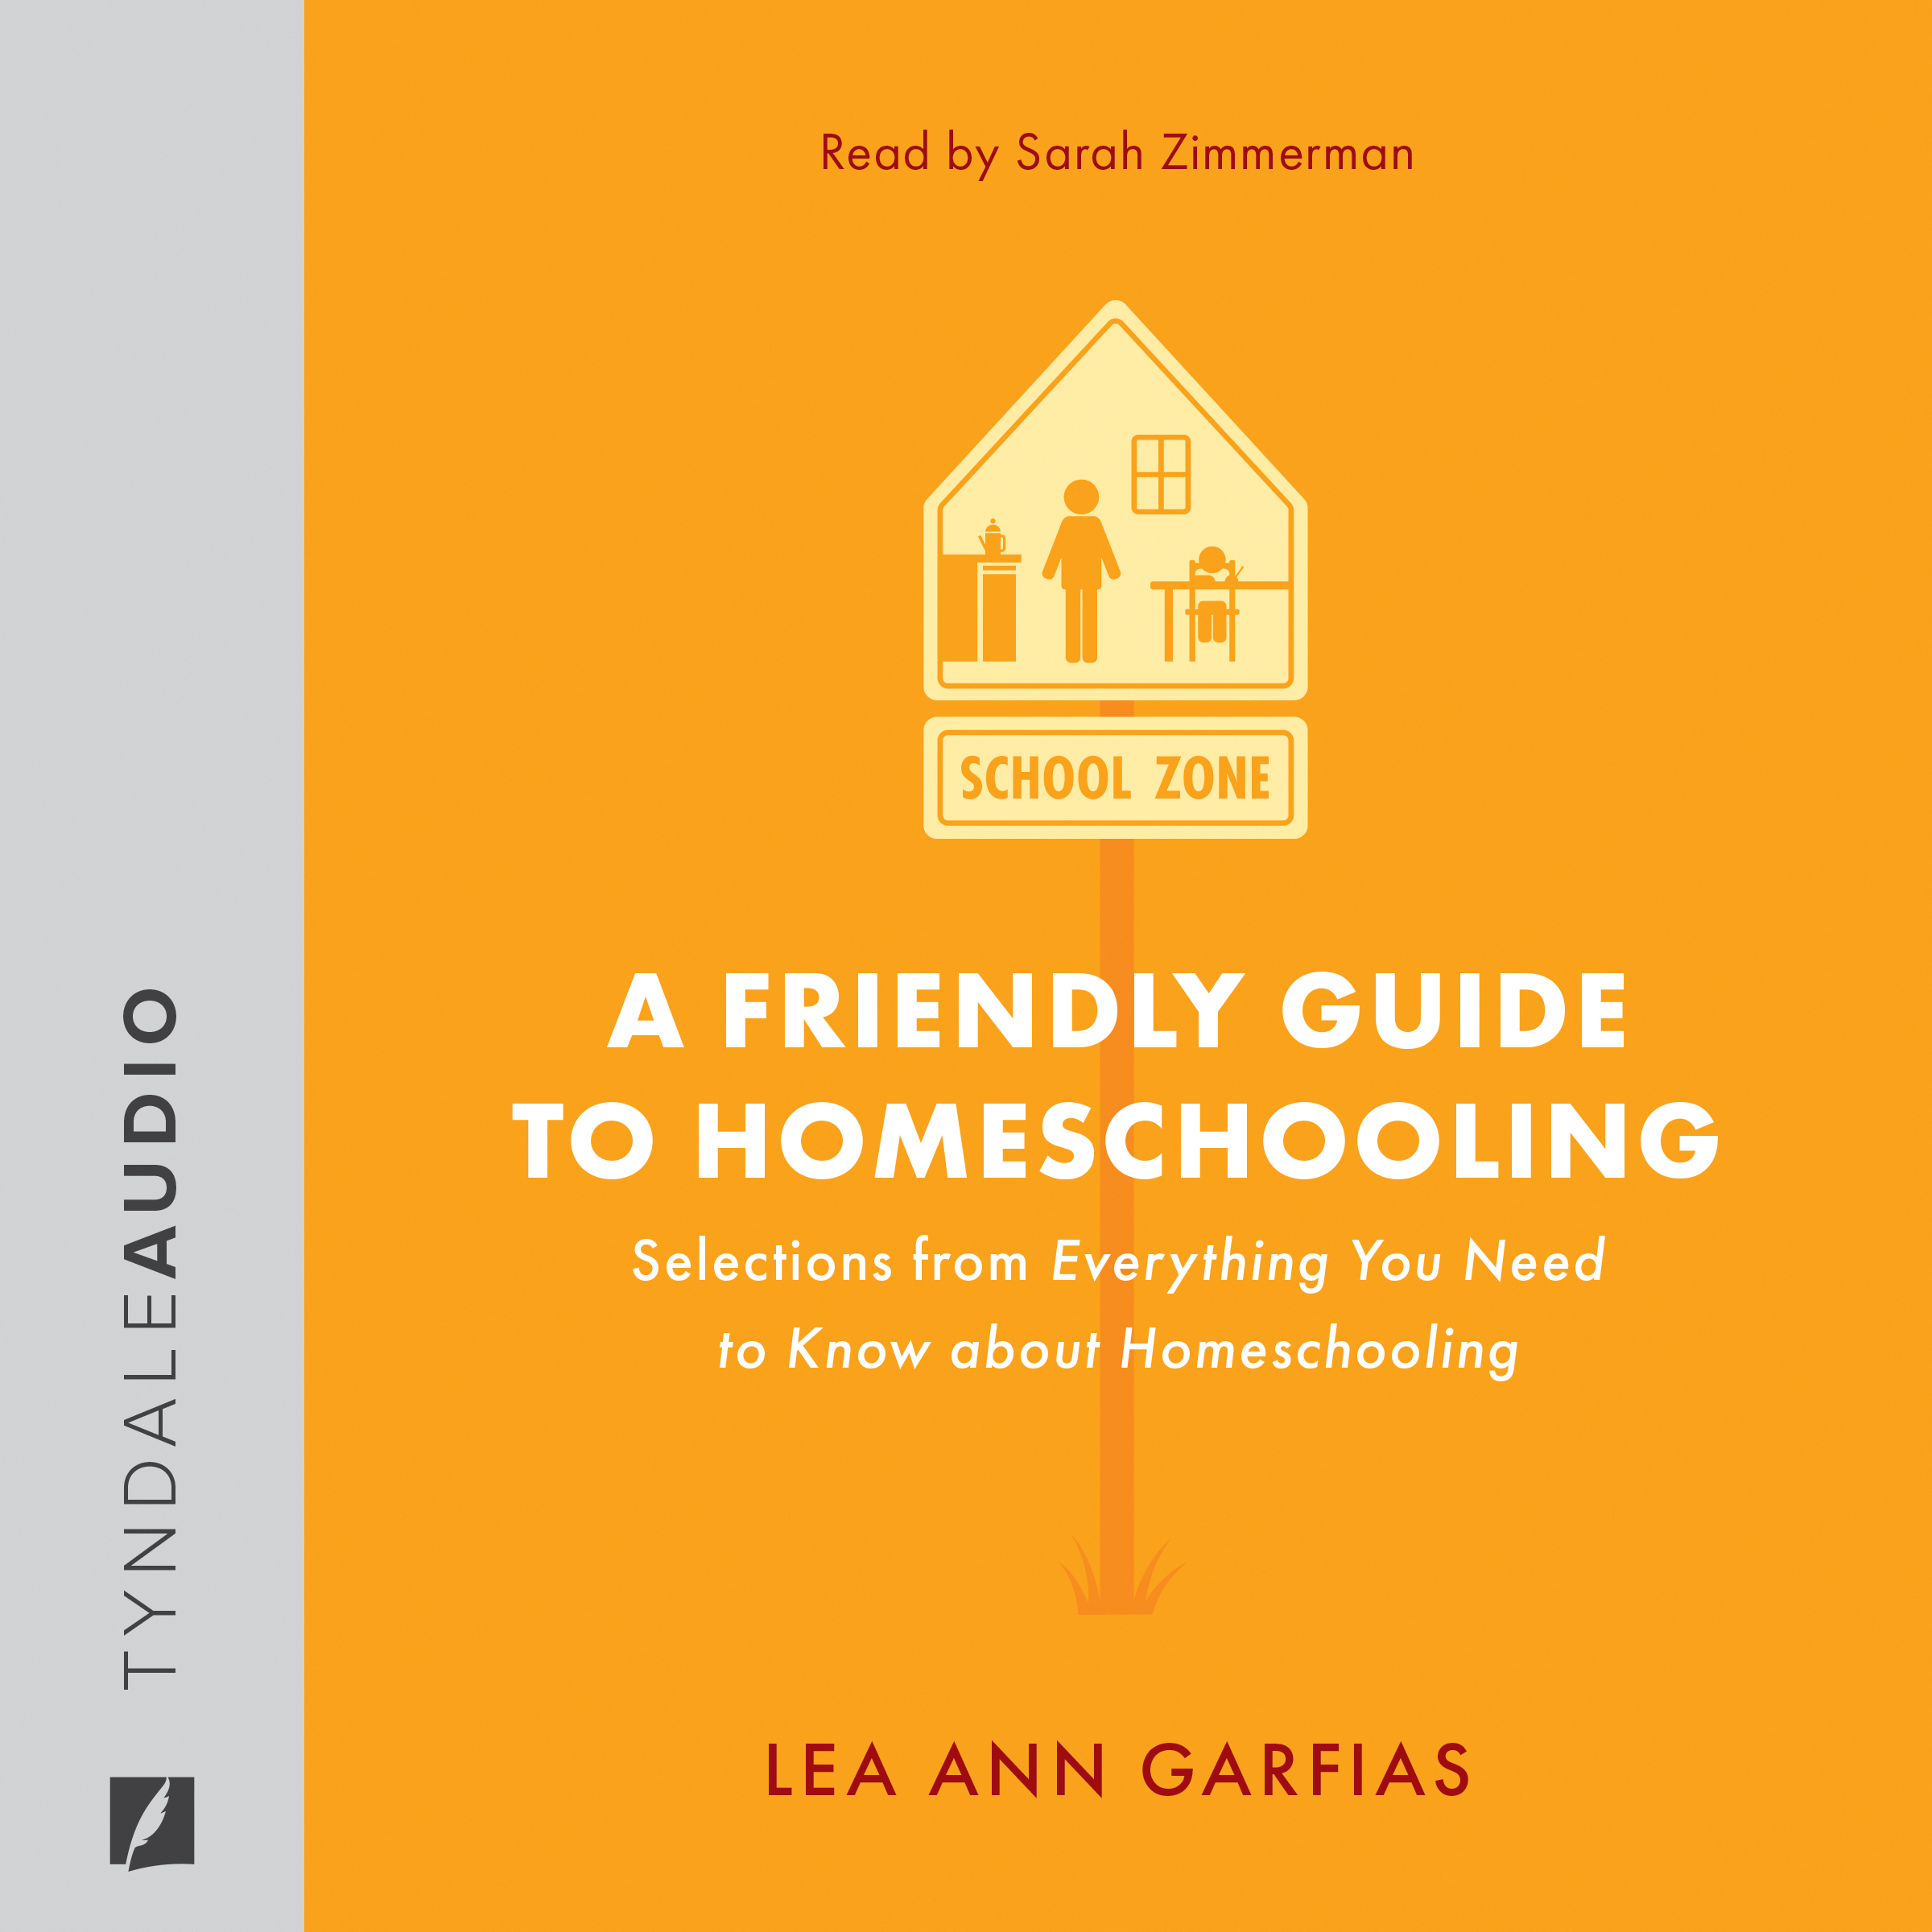 A Friendly Guide to Homeschooling